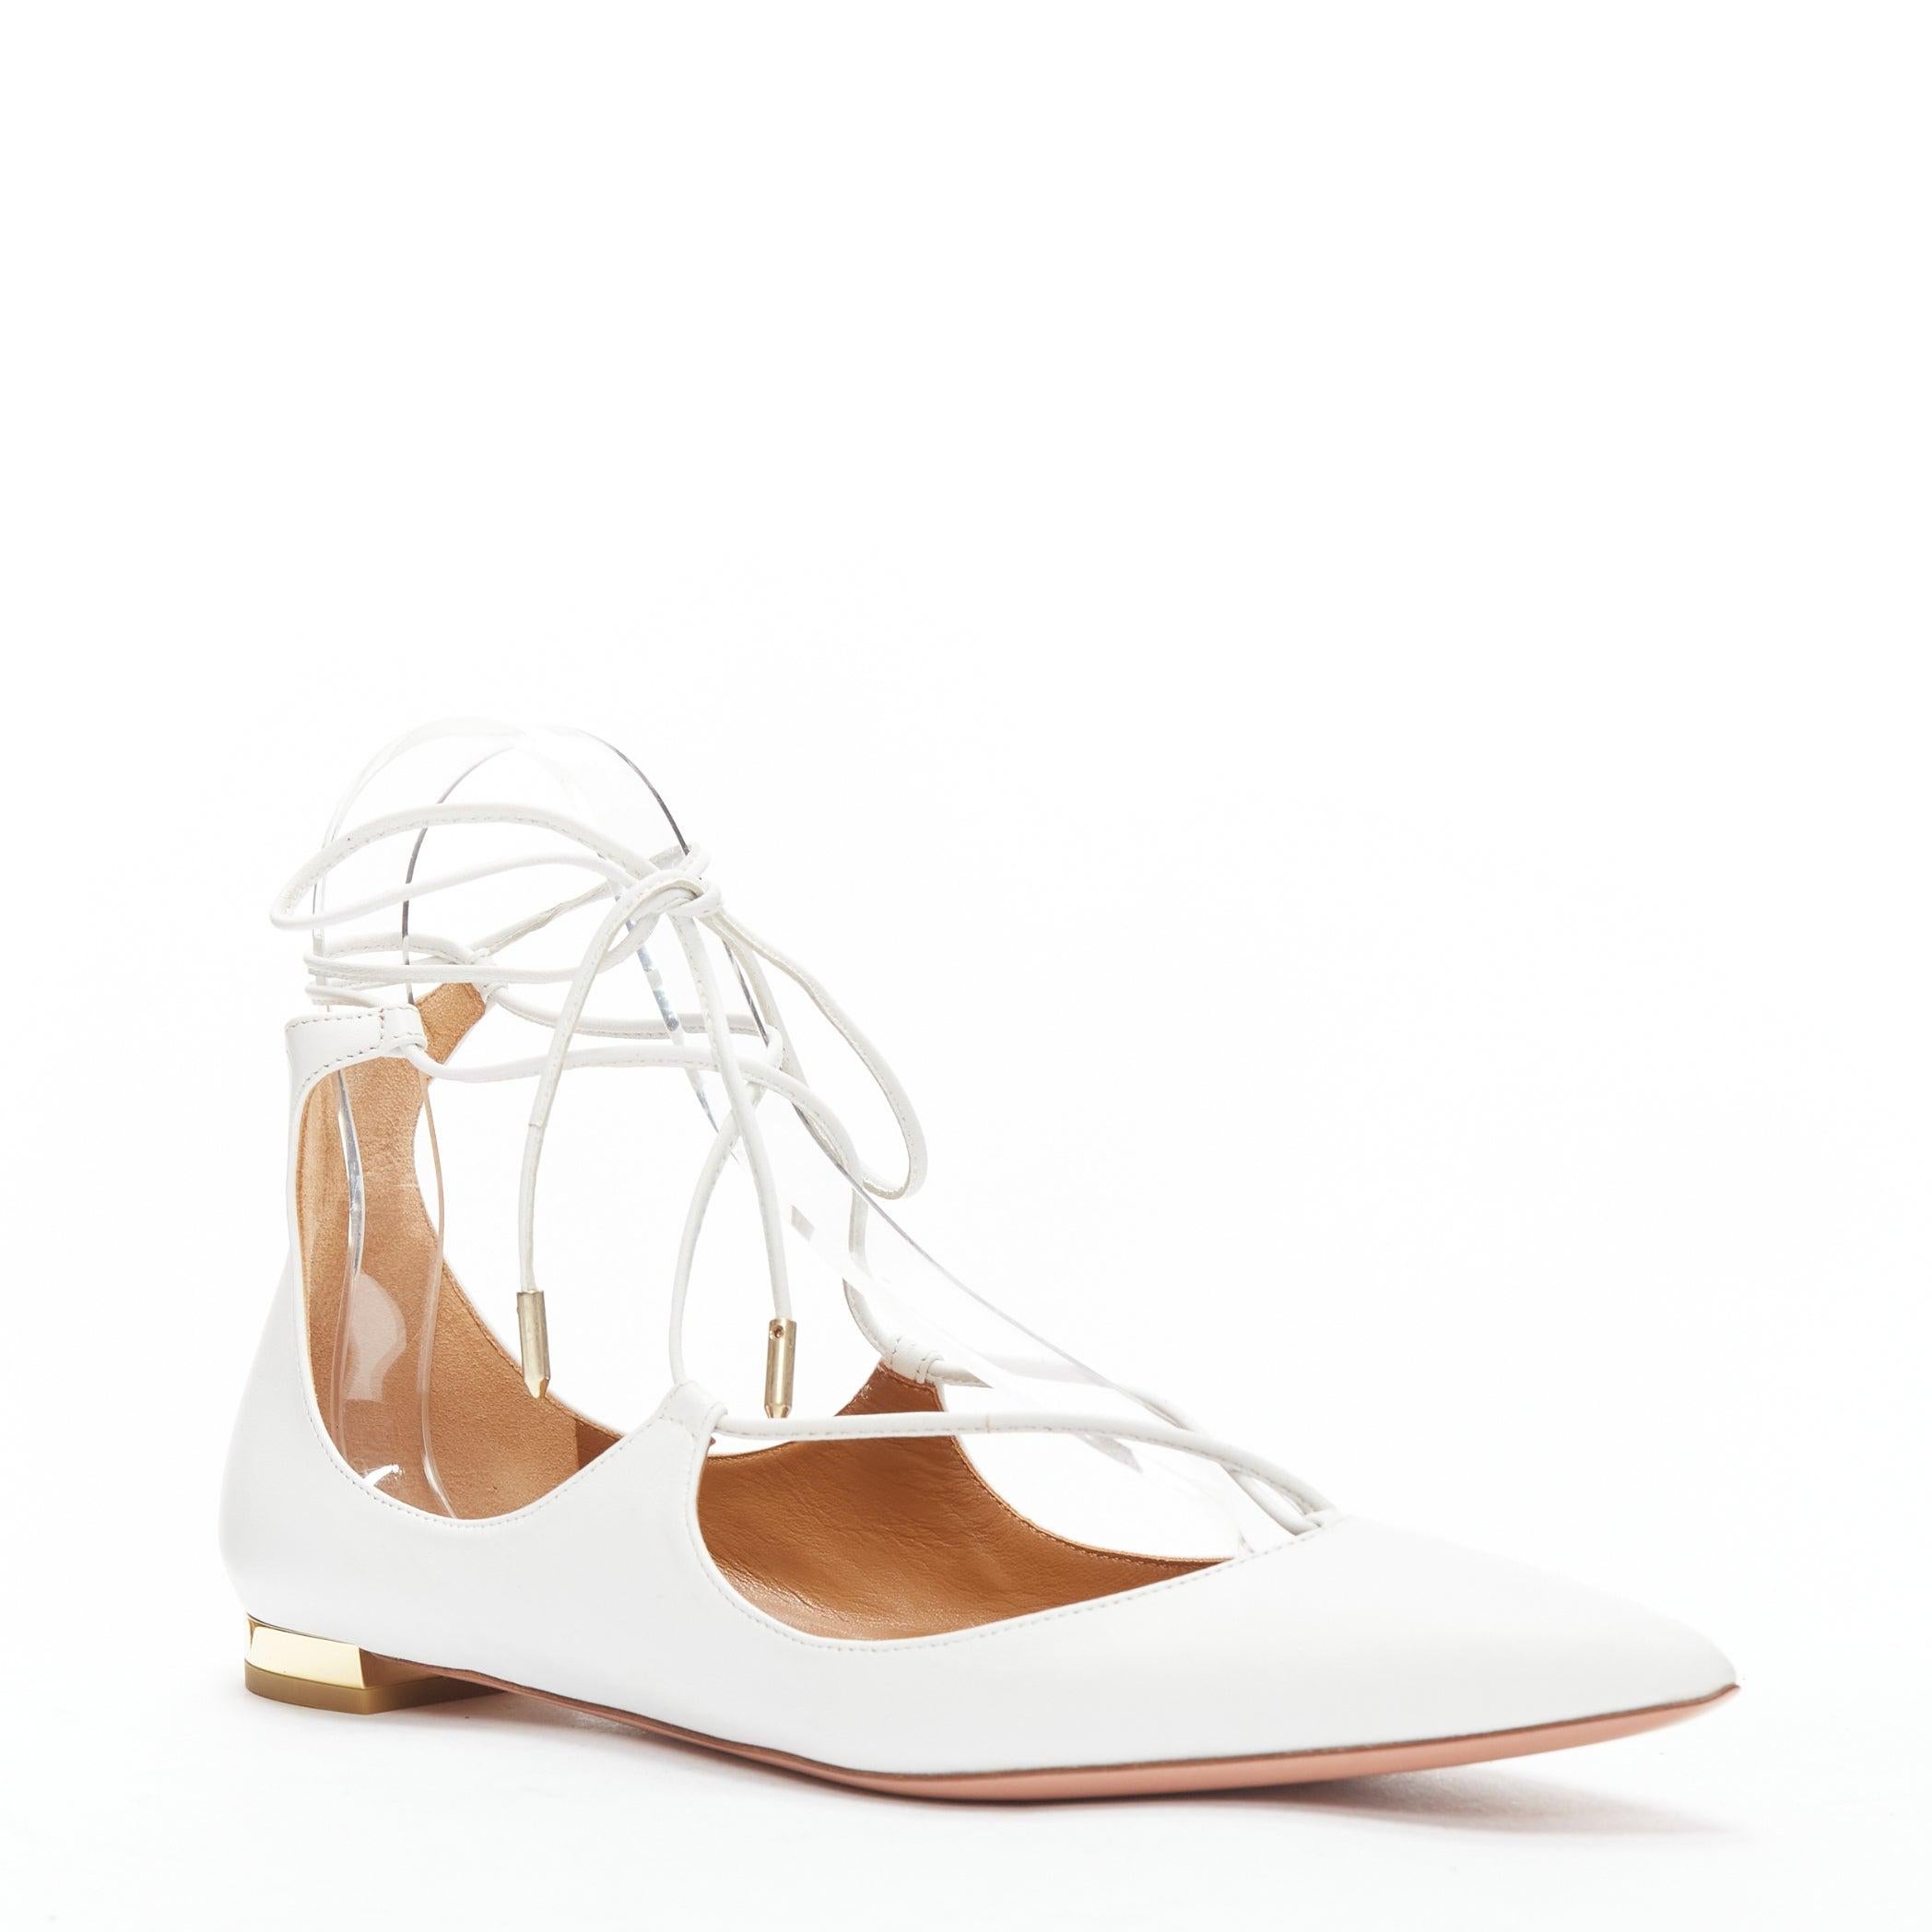 AQUAZZURA Christy white leather lace up pointed flats EU37.5A
Reference: SNKO/A00373
Brand: Aquazzura
Model: Christy
Material: Leather
Color: White, Gold
Pattern: Solid
Closure: Lace Up
Lining: Nude Leather
Made in: Italy

CONDITION:
Condition: New